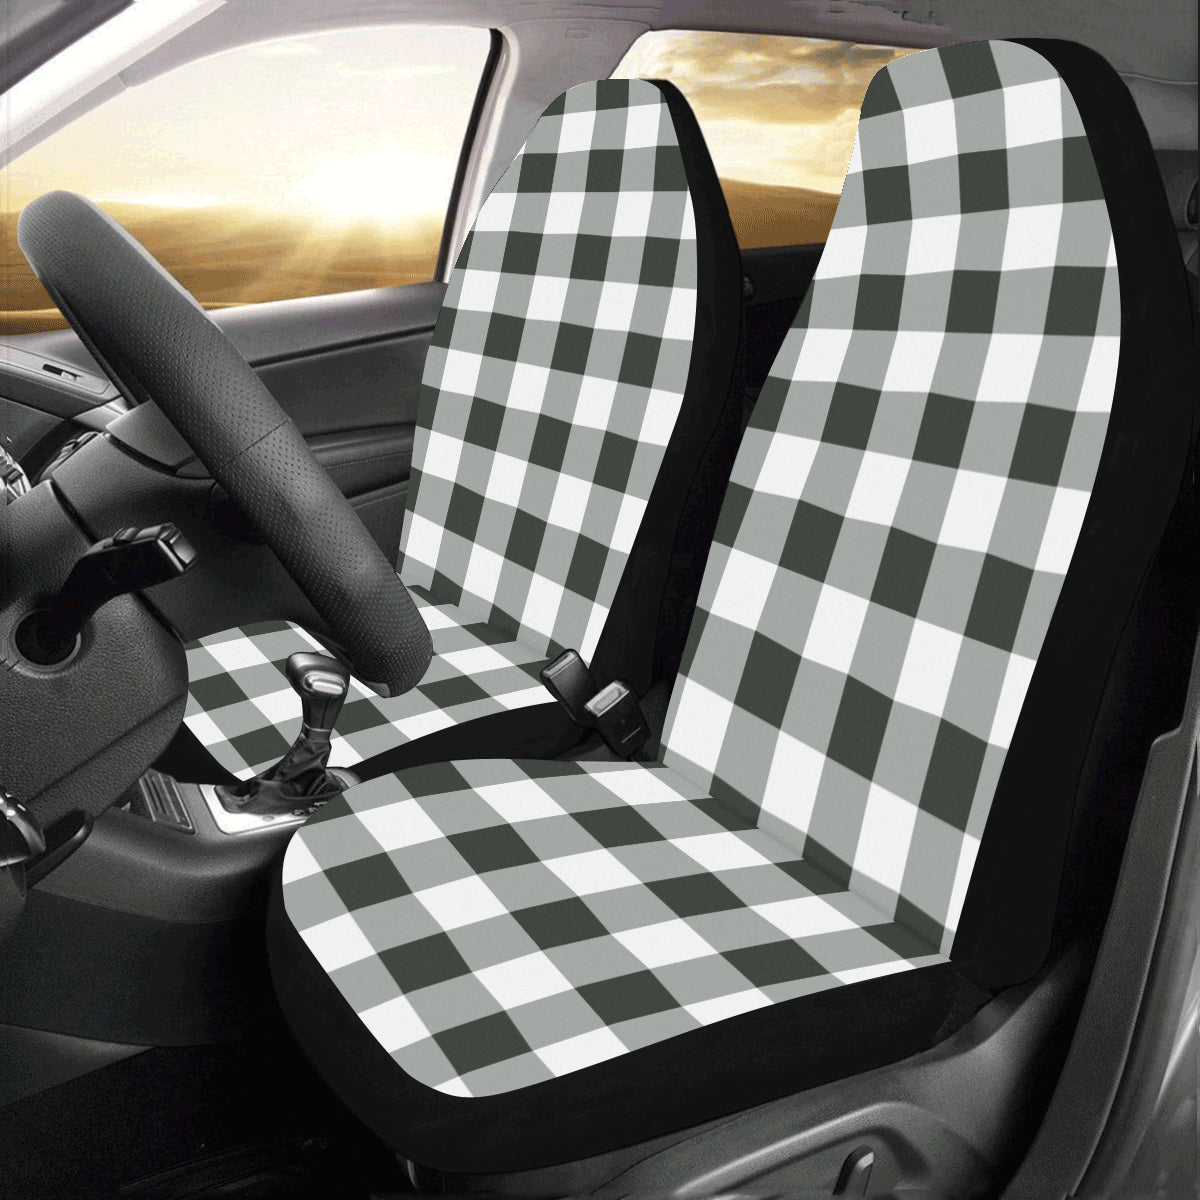 Buffalo Plaid Car Seat Covers 2 pc, Black and White Check Lumberjack Front Seat Covers, Car SUV Seat Protector Accessory Starcove Fashion